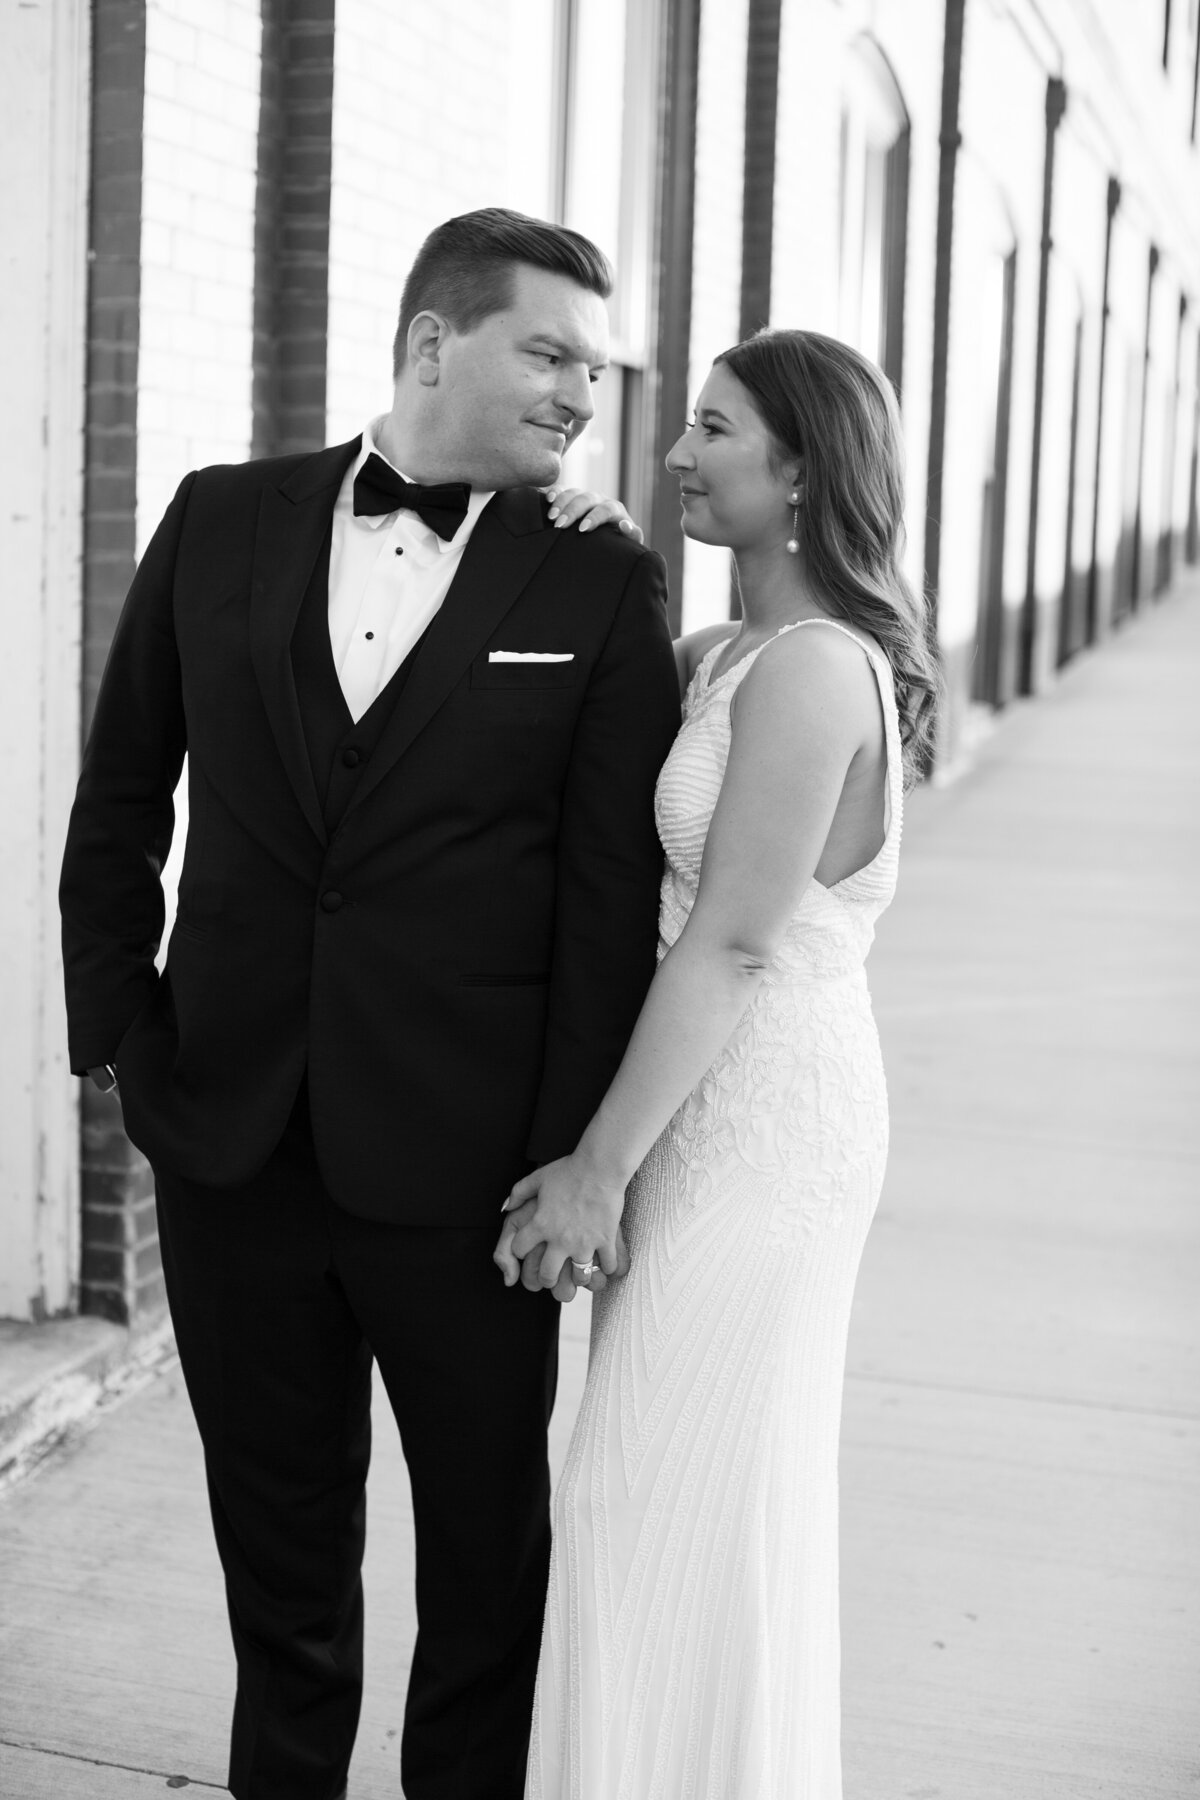 mariah_rock_photography_classic_timeless_wedding_photographer_knoxville_tennessee_chattanooga_tennessee_destination_travel_fine_art_high_end_luxury_wedding_engagement_elopement_photo_black_white_elegant_traveling_travel_city